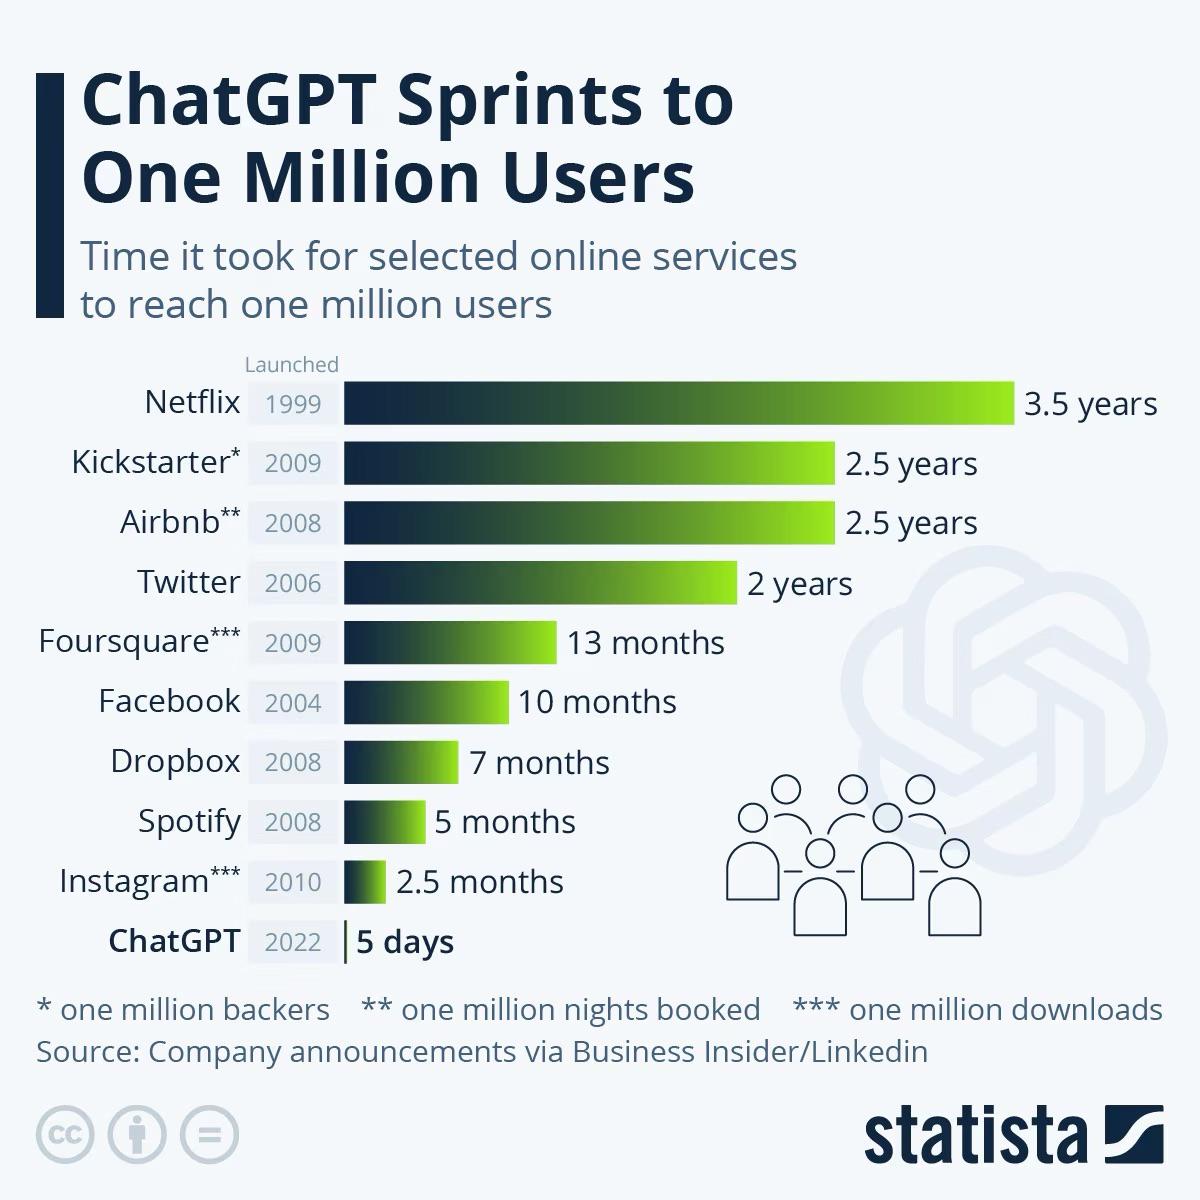 chatgpt-sprints-to-one-million-users